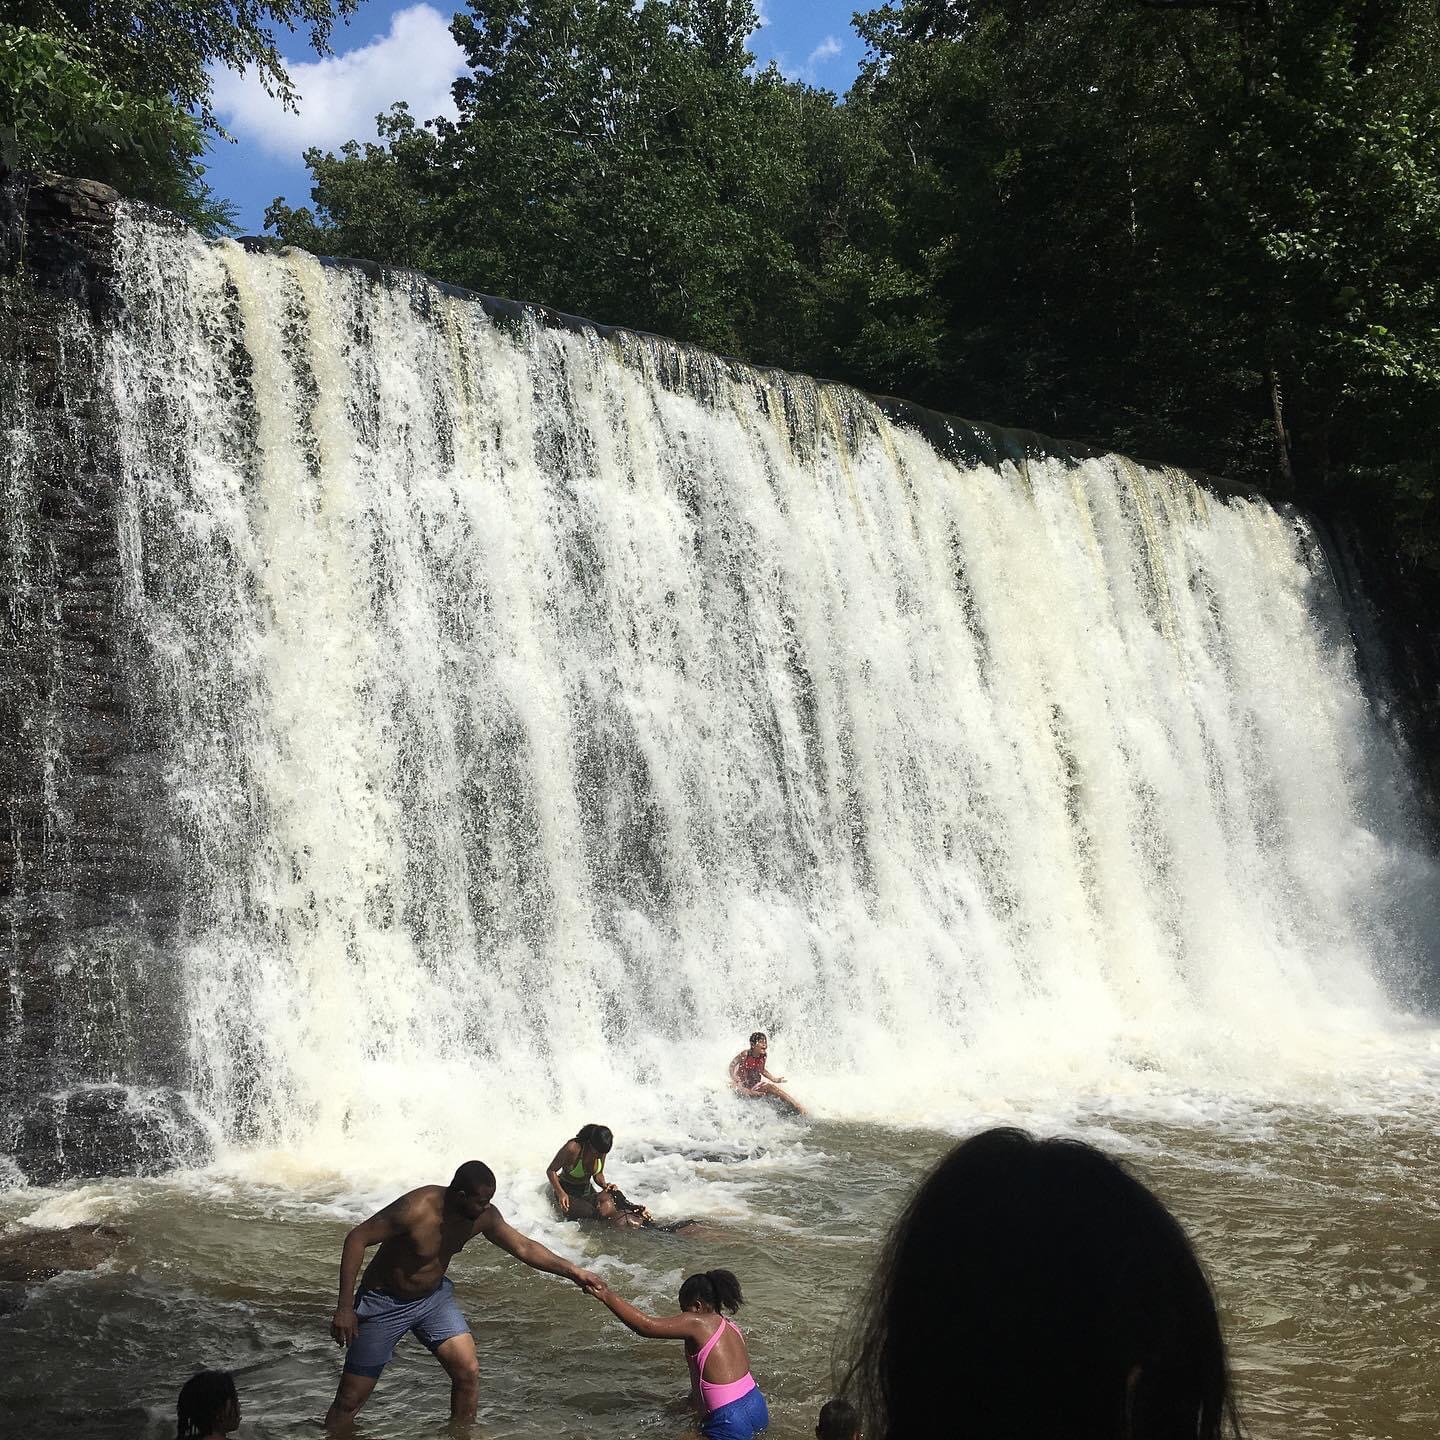 People relaxing at the foot of a waterfall.